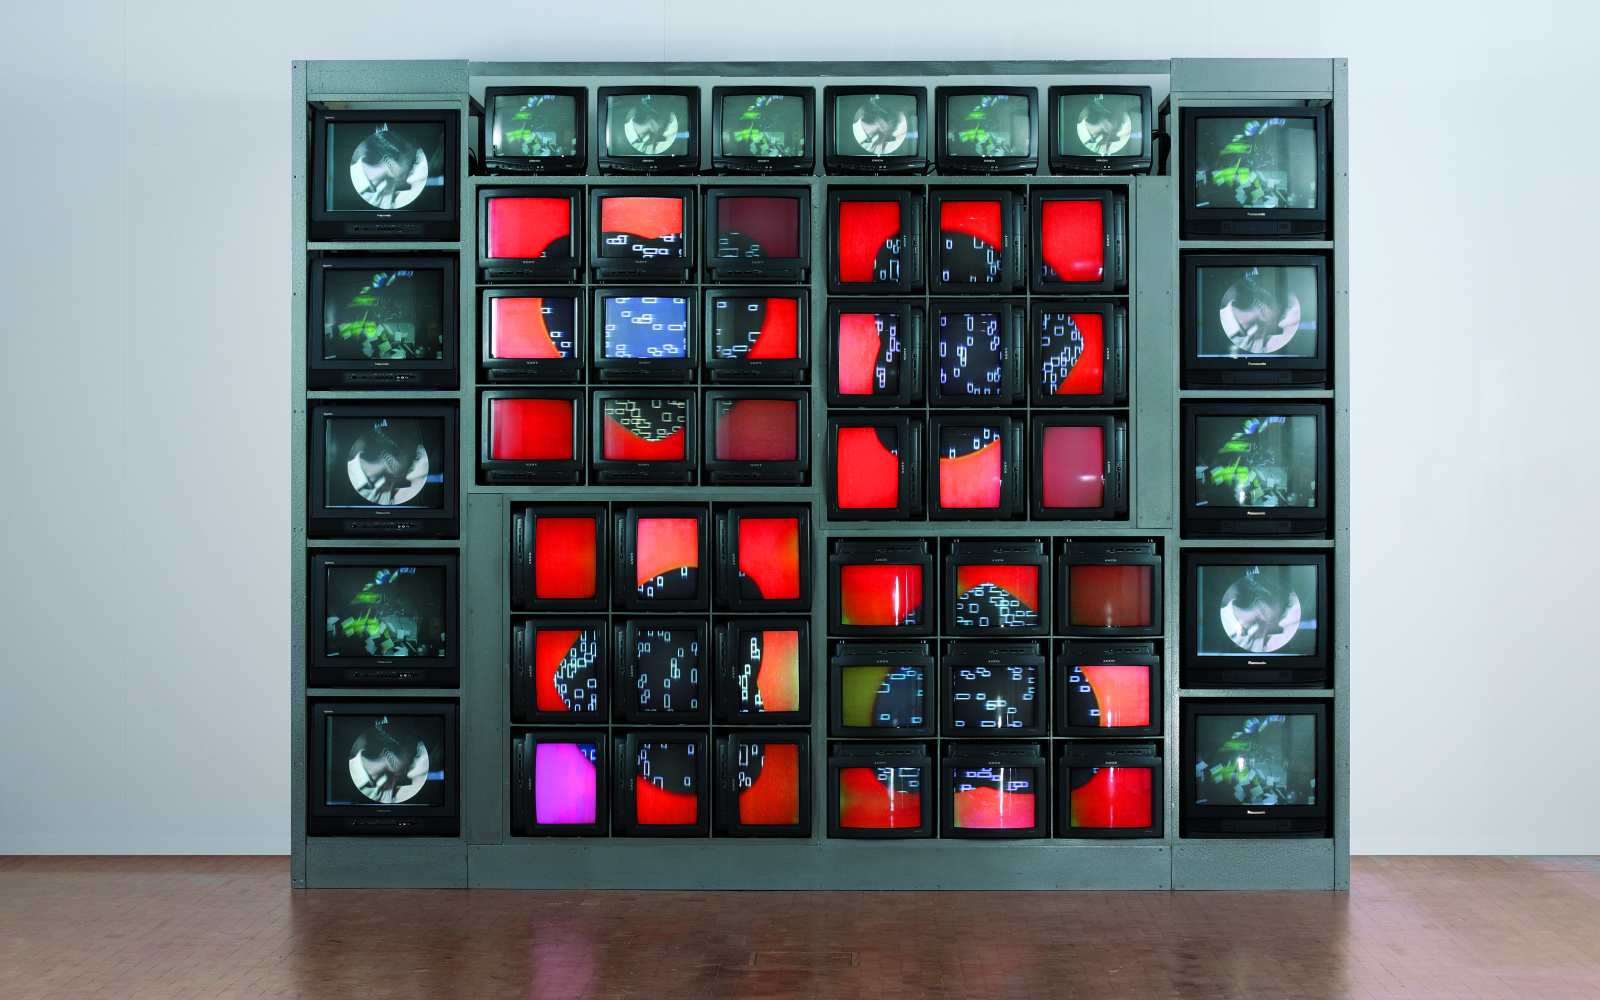 Sculpture formed out of different sized TVs playing various videos in vibrant colors.